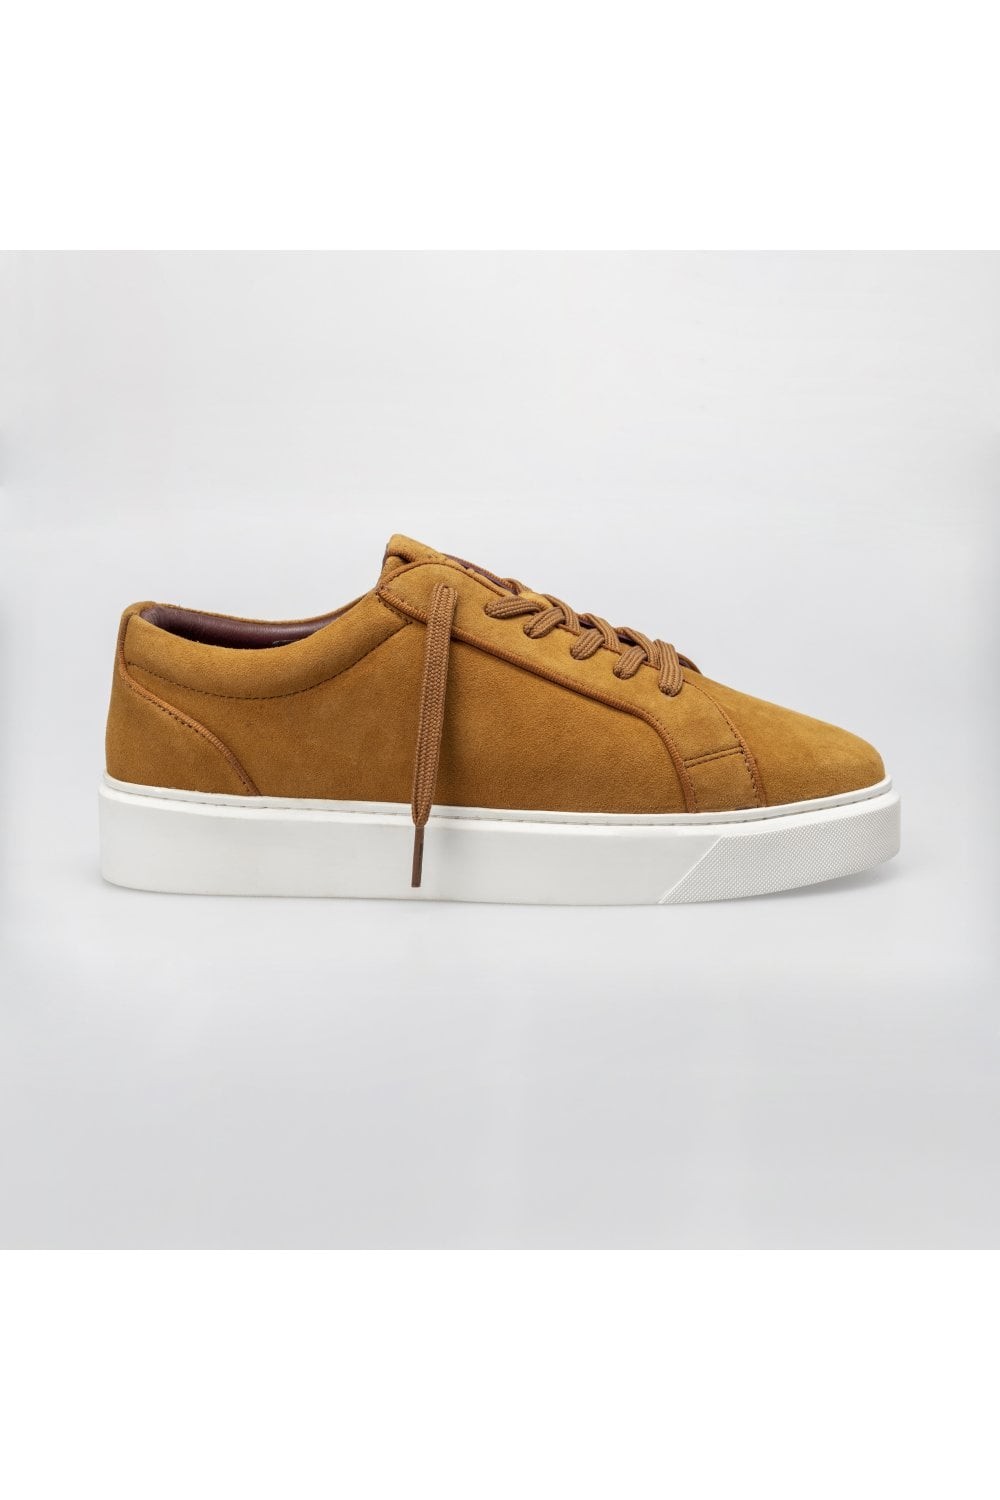 Men's Thick Rubber Sole Lace Up Sneakers - Mustard